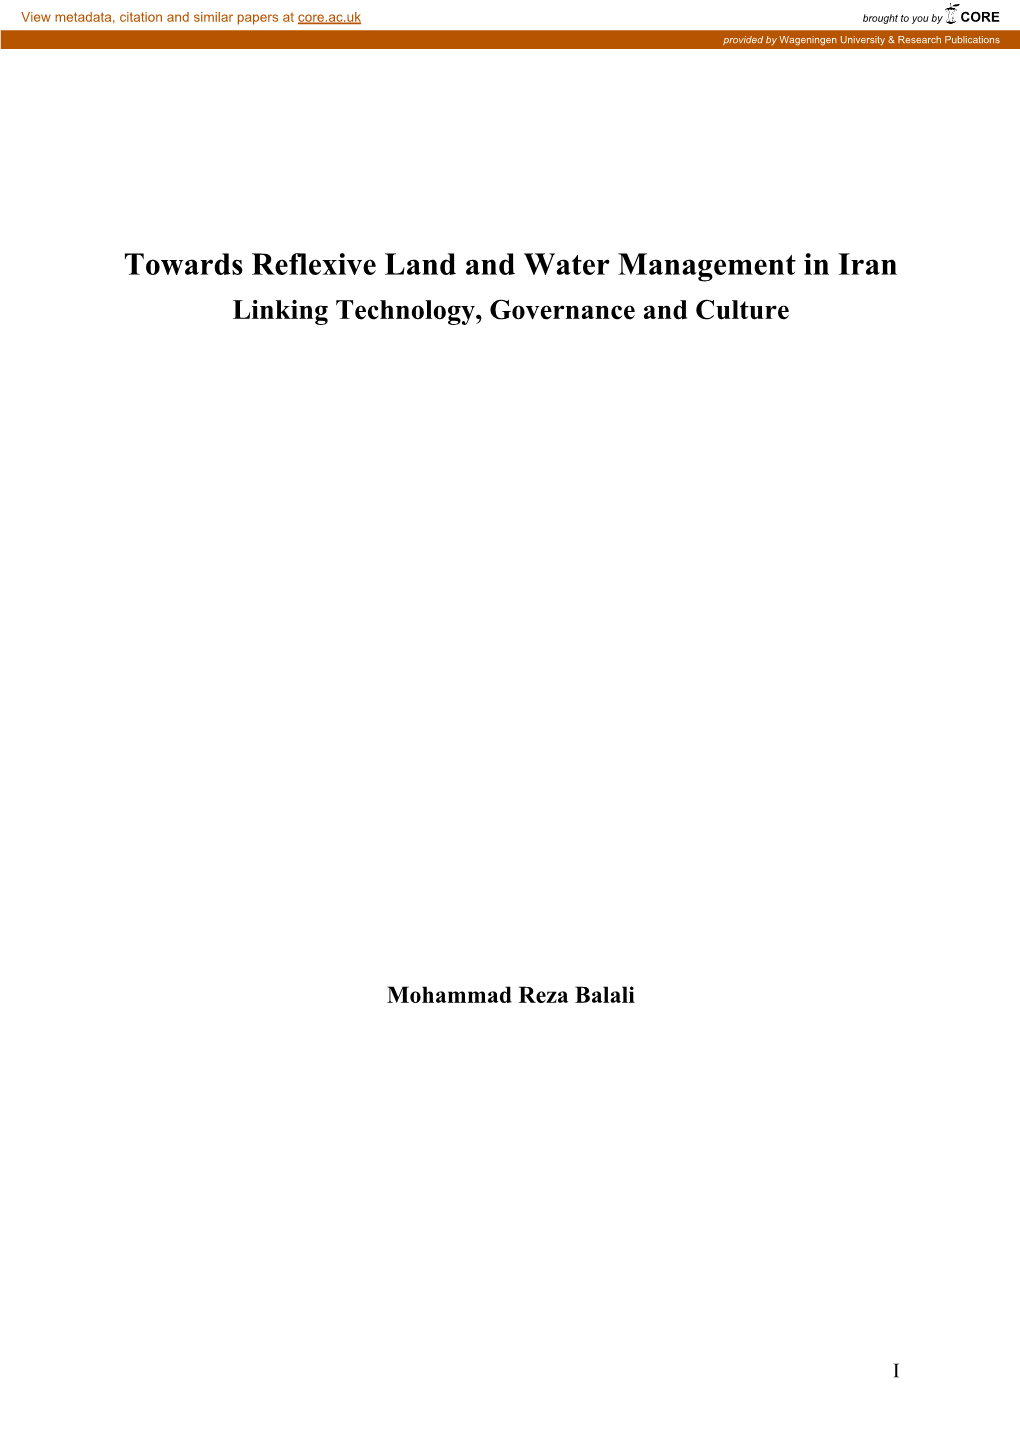 Towards Reflexive Land and Water Management in Iran Linking Technology, Governance and Culture